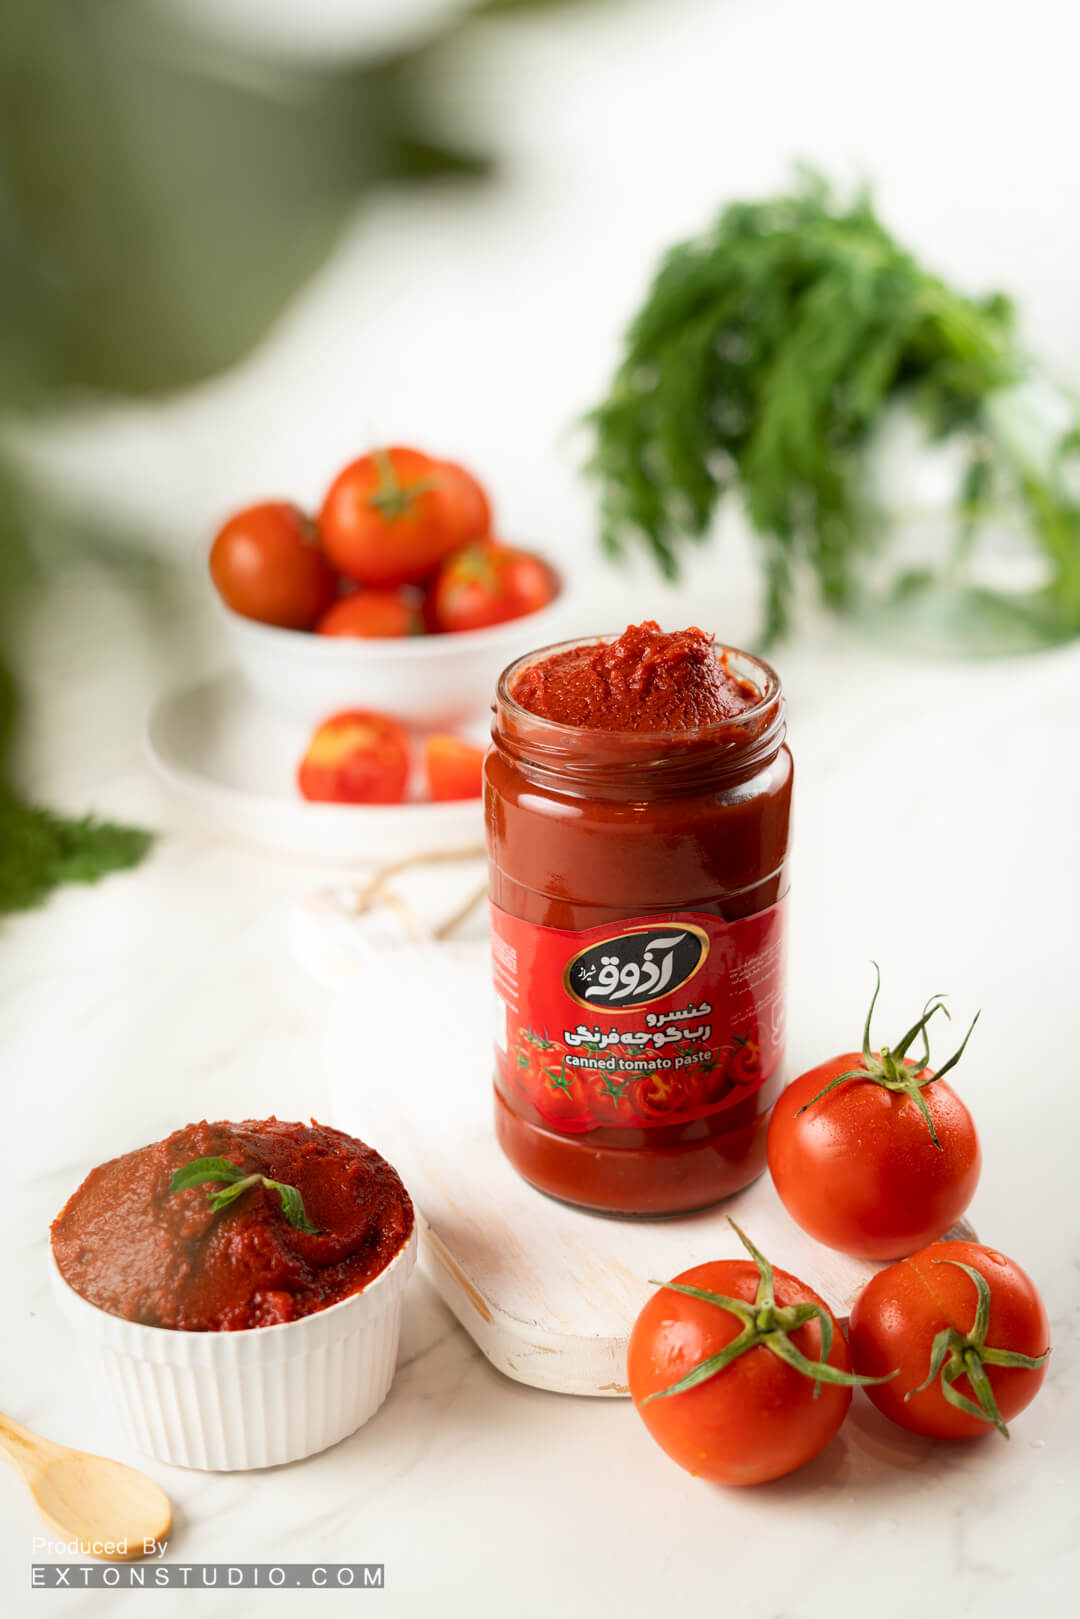 Advertising photography of tomato paste